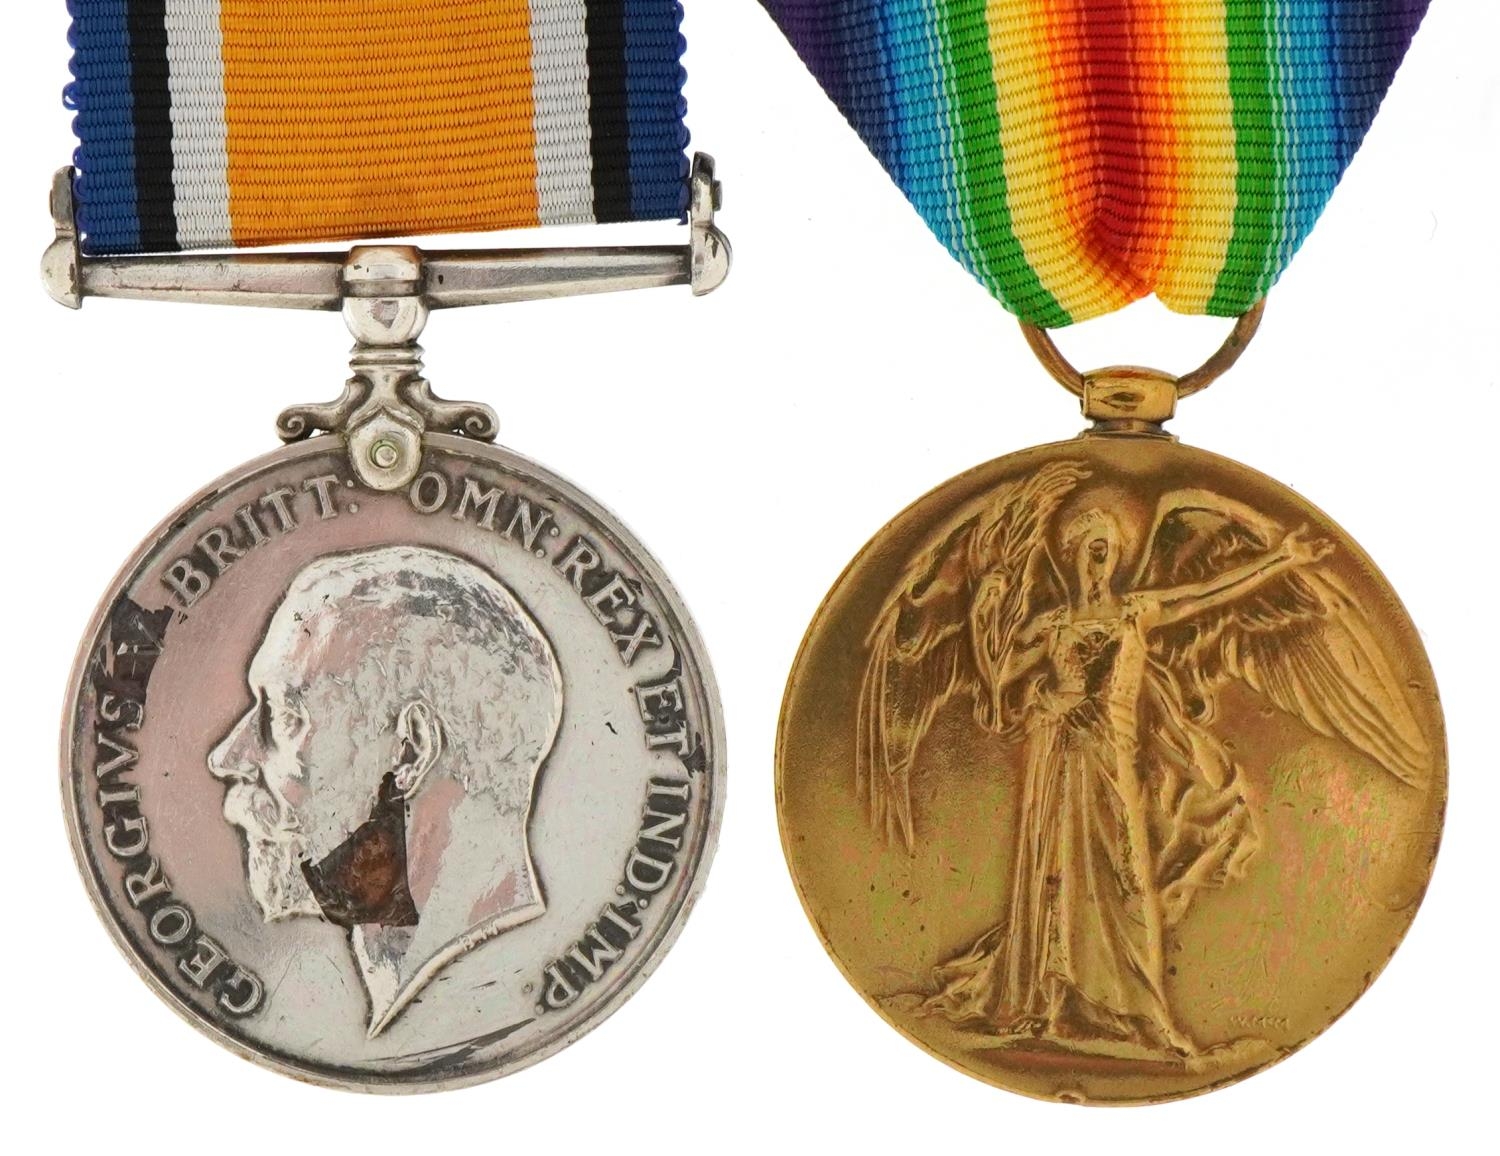 British military World War I medals awarded to PTE J.C.TIPPER K.O.Y.L.D. and SJT A.WILKS ACC